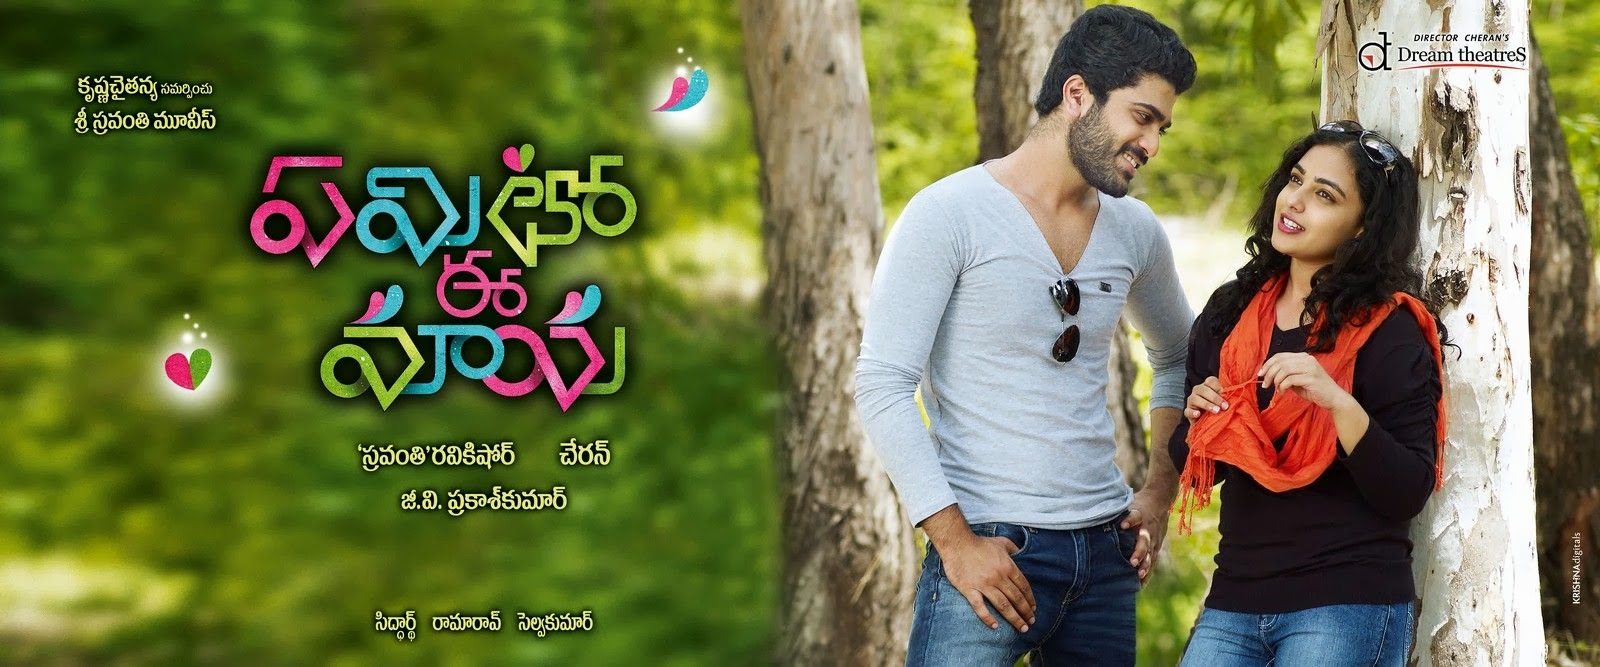 Discover 139+ jeans telugu mp3 songs download latest